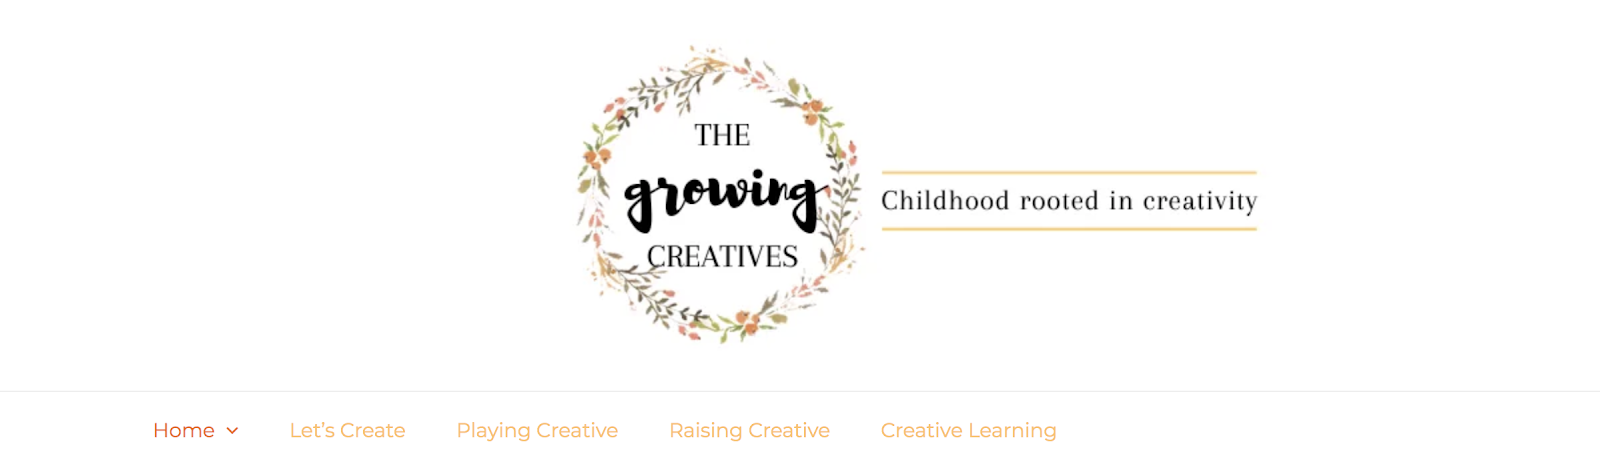 The Growing Creatives Blog for Children and Creativity (Screenshot)